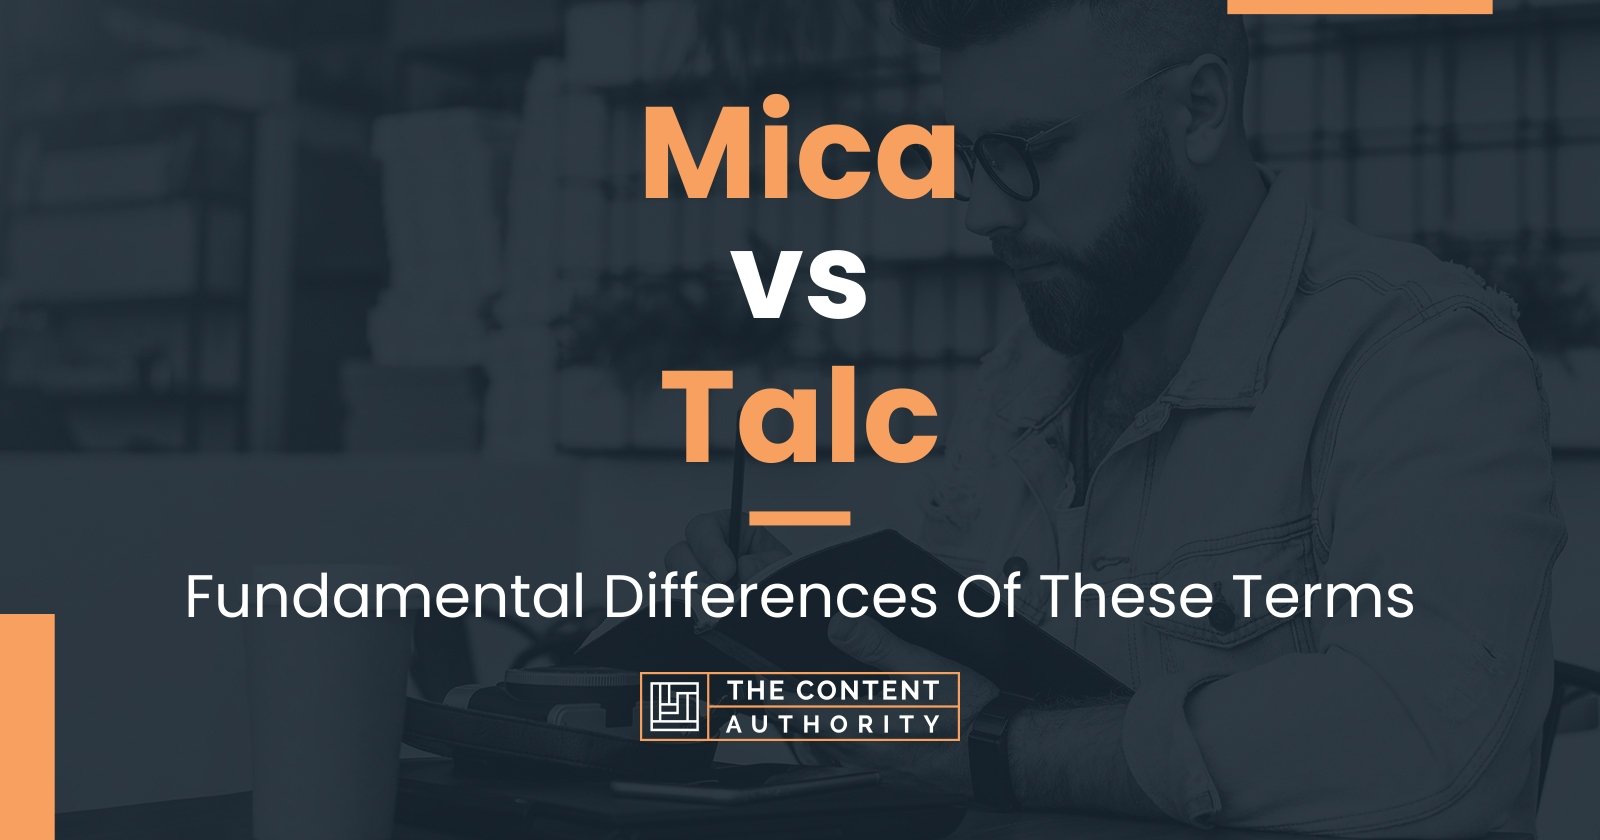 Mica vs Talc: Fundamental Differences Of These Terms